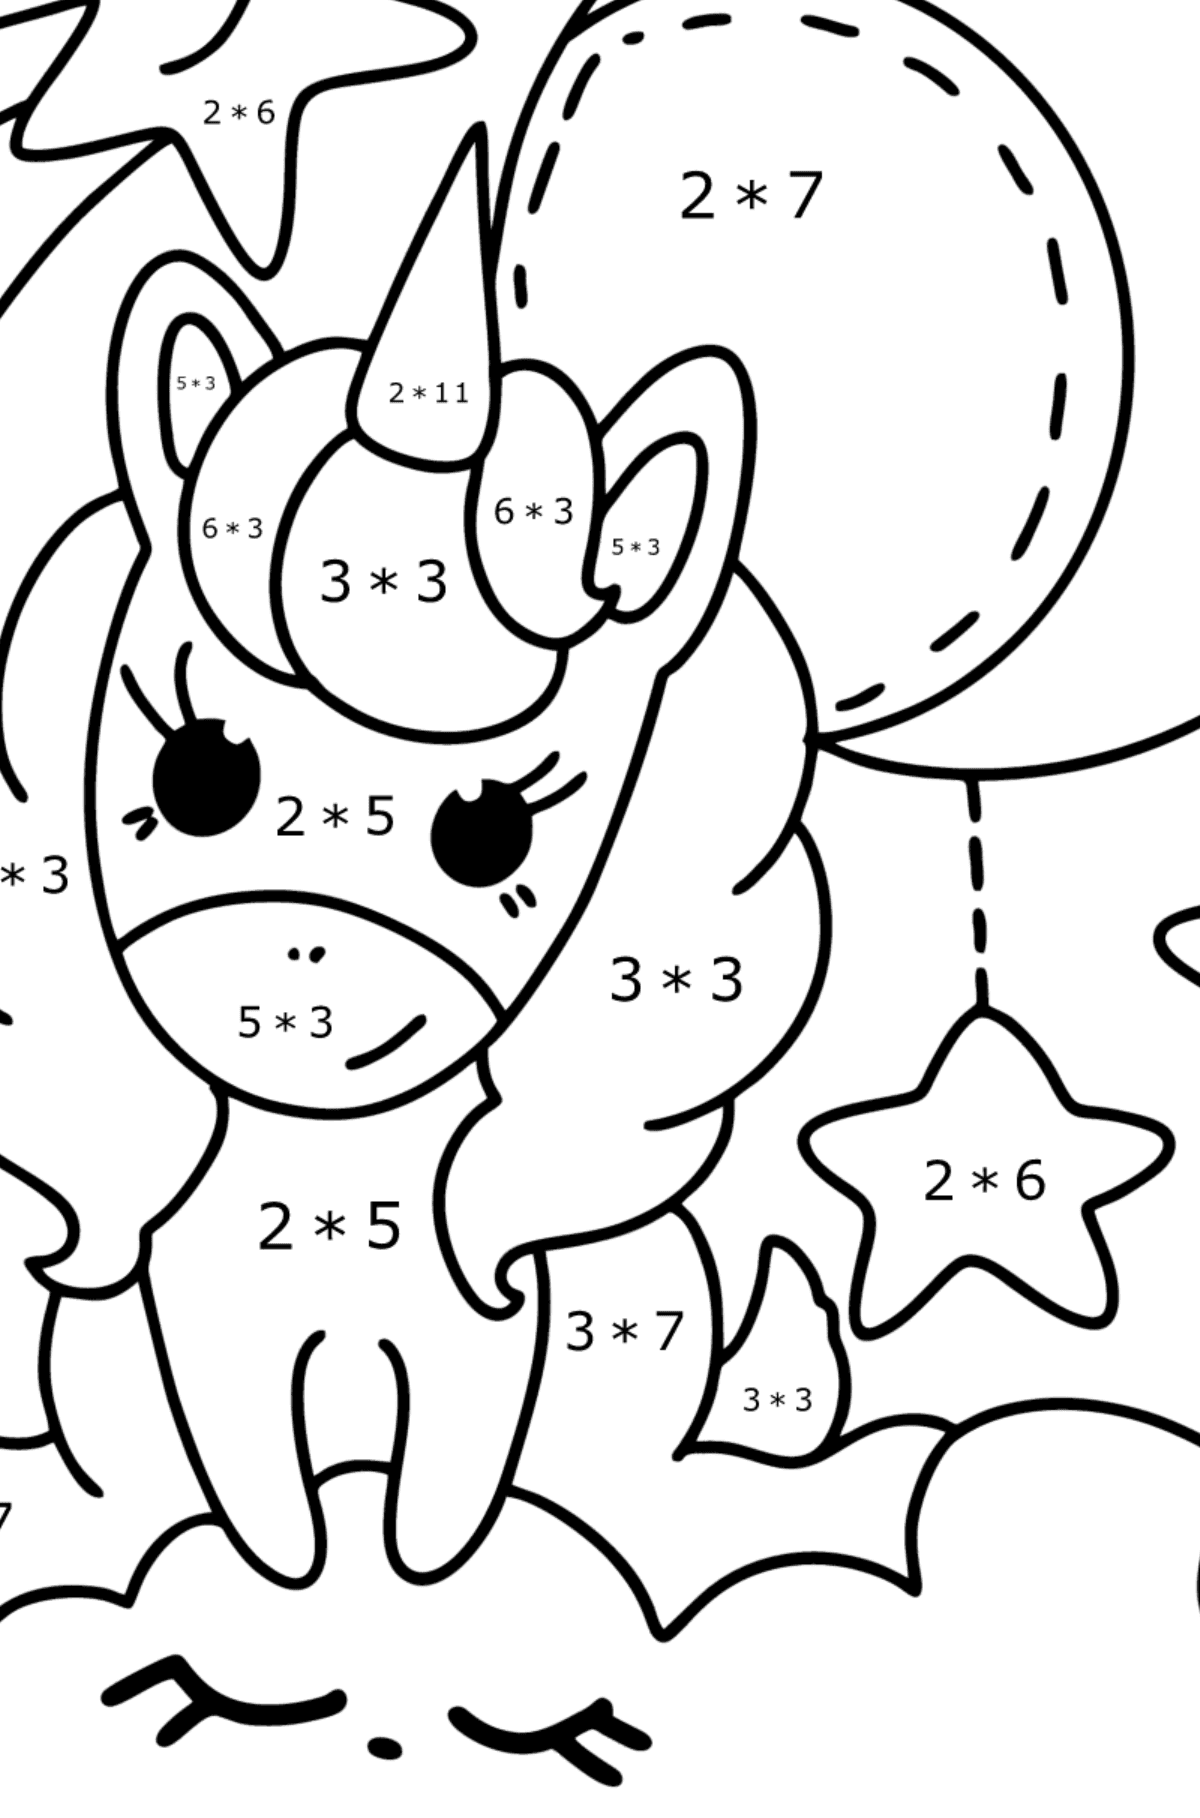 Moon unicorn coloring page - Math Coloring - Multiplication for Kids